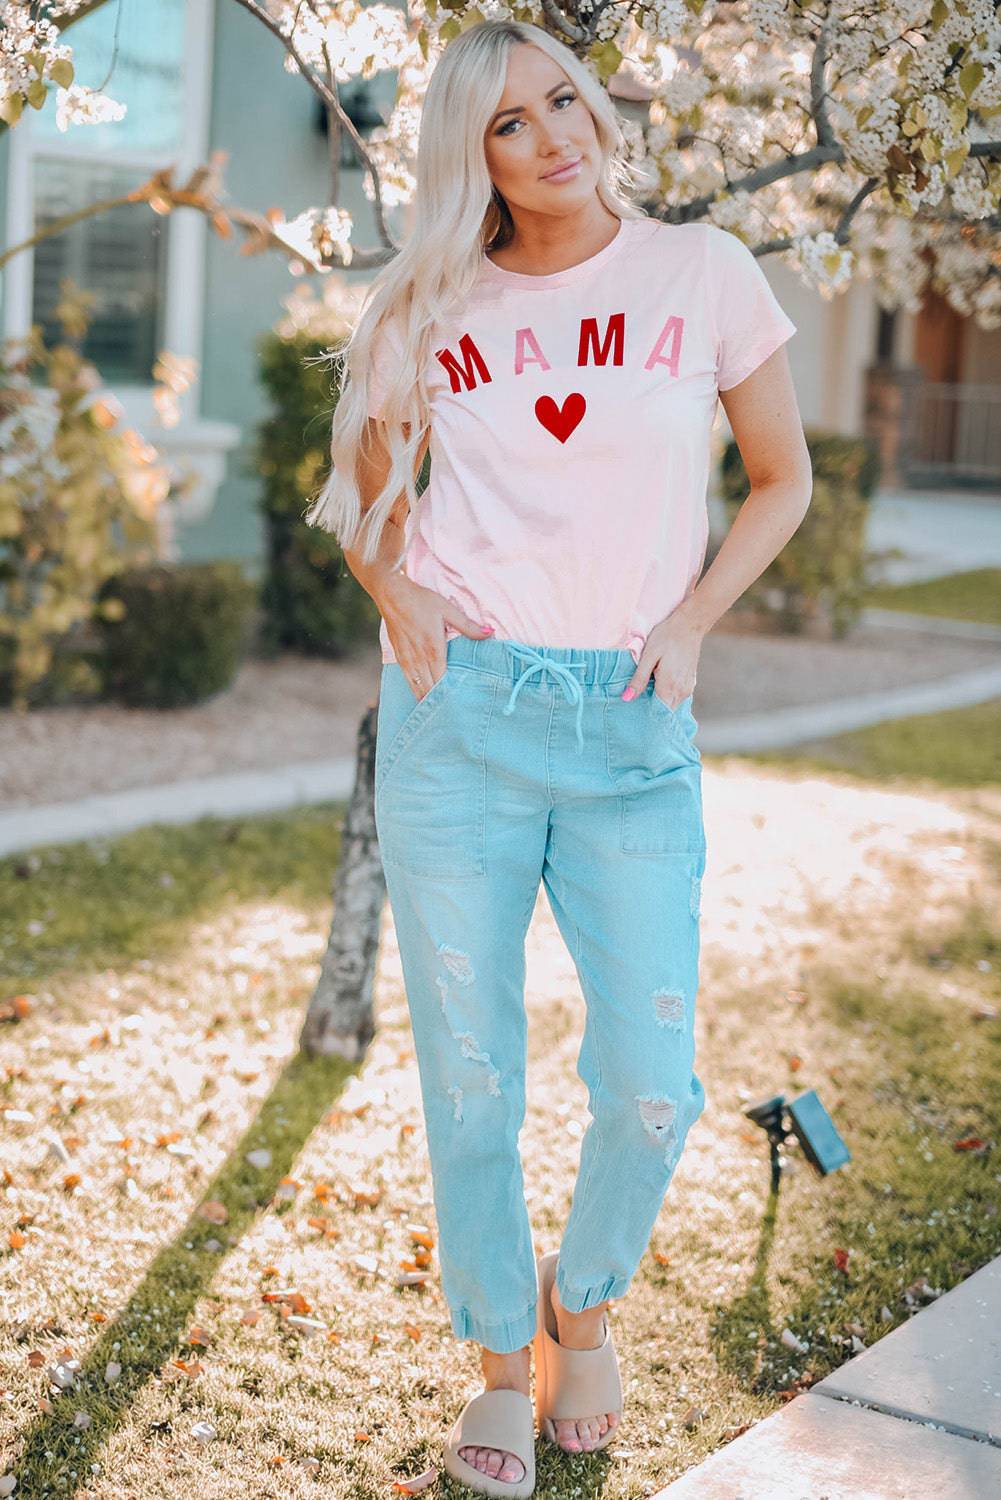 MAMA Heart Graphic Tee - Wear Your Love on Your Sleeve - Celebrate the Romance of Motherhood - Guy Christopher